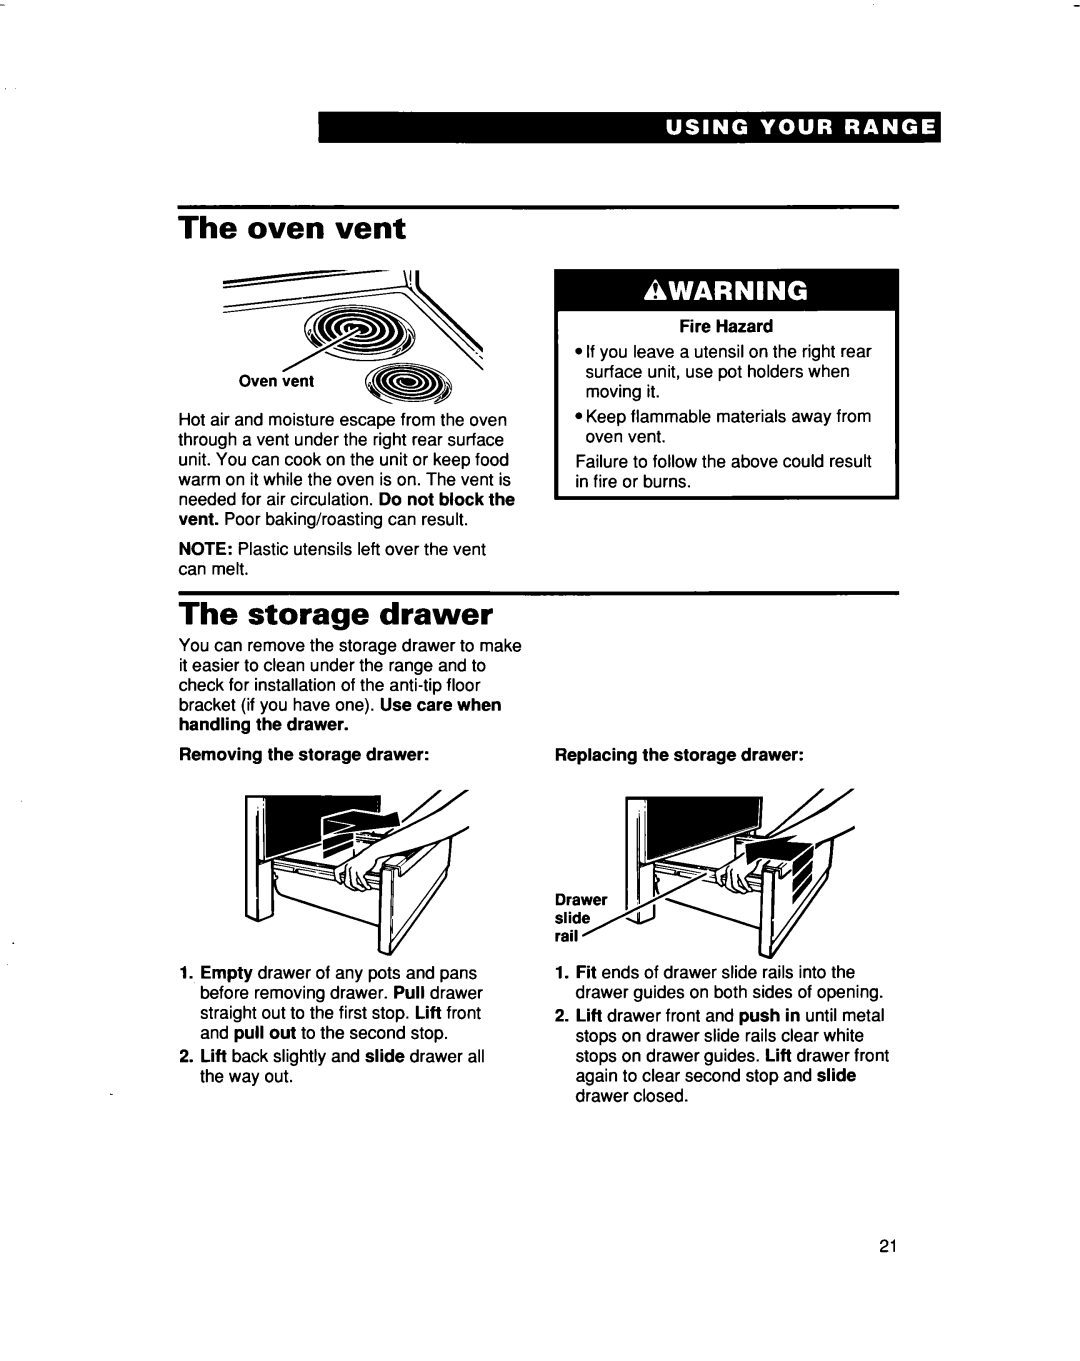 Whirlpool RF315PXD manual The oven vent, The storage drawer, Oven vent @B, Removing the storage drawer, Fire Hazard 